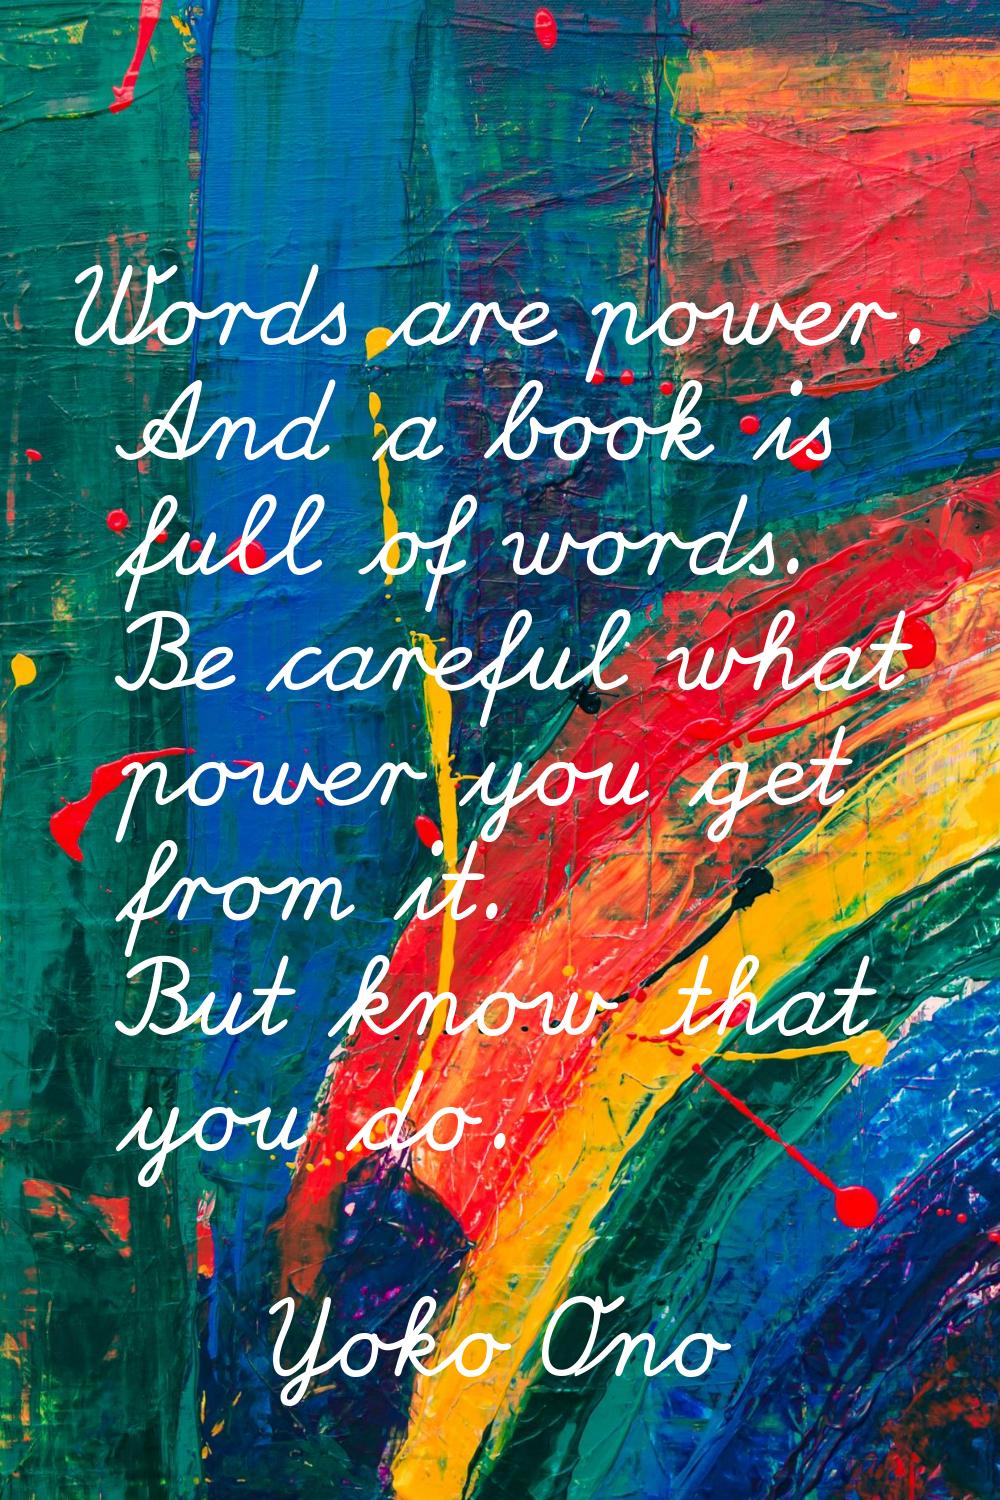 Words are power. And a book is full of words. Be careful what power you get from it. But know that 